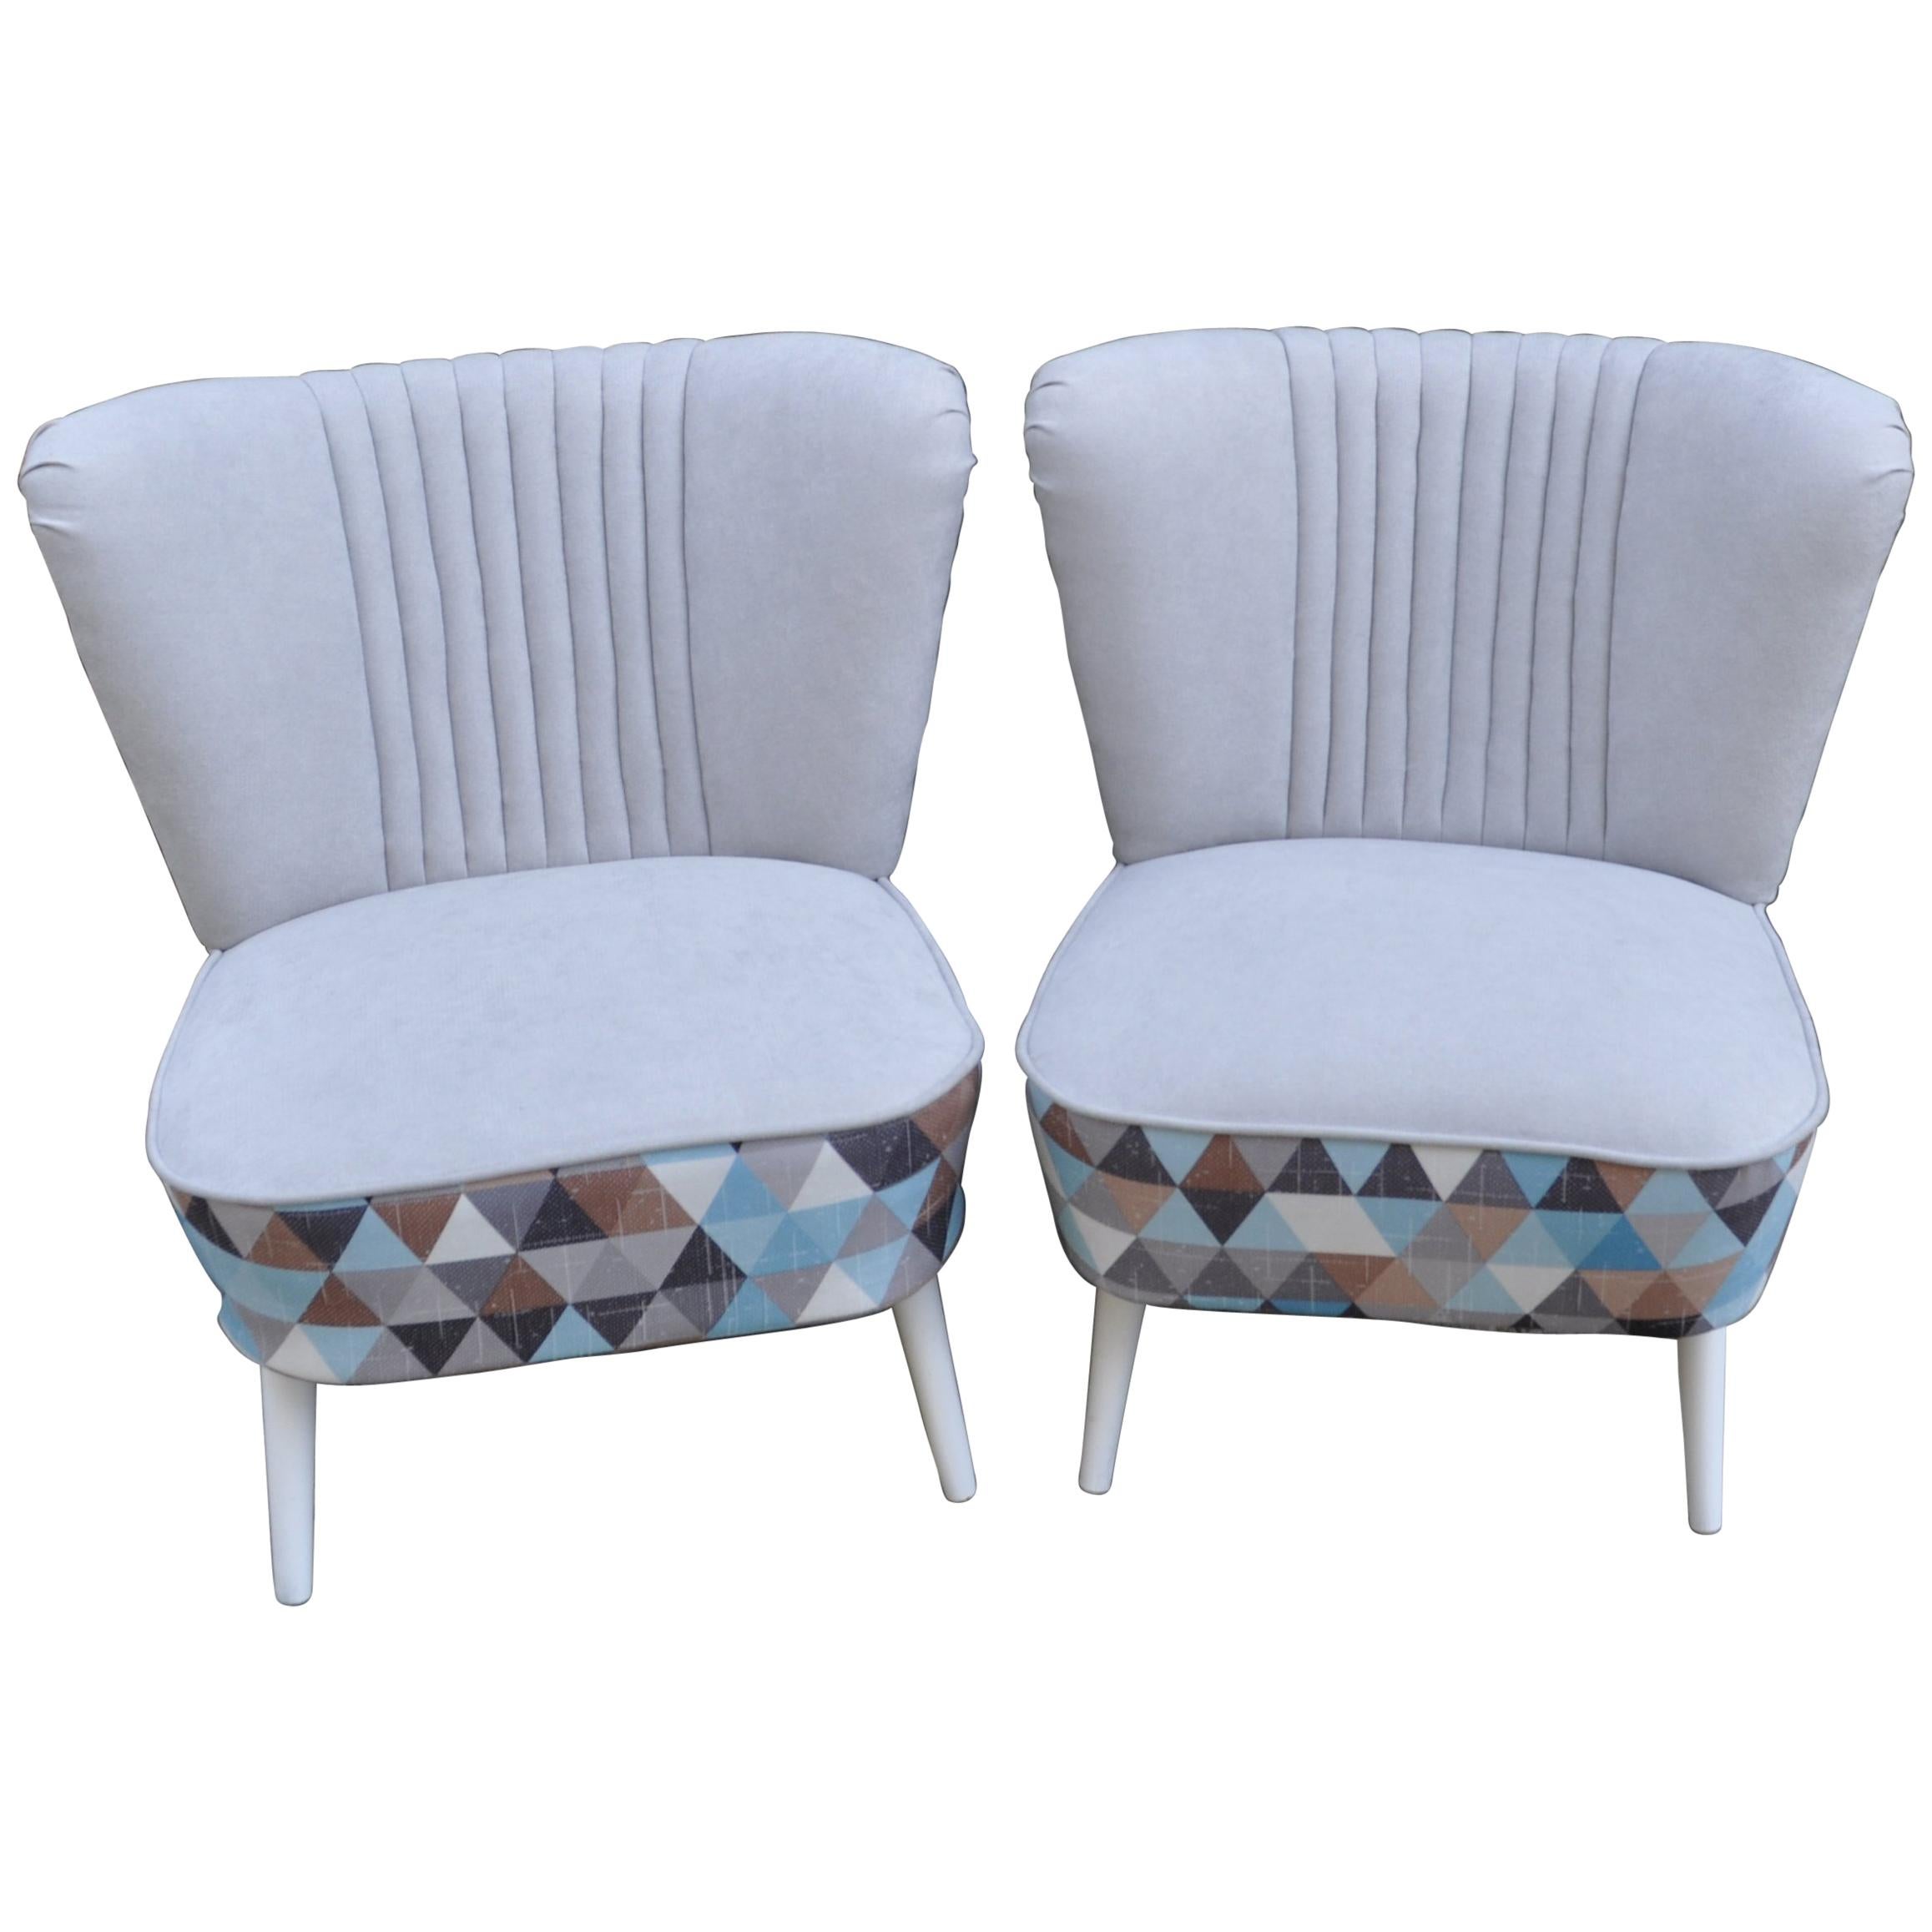 Pair of Cocktail Chairs Gray and Geometric Shape Fabric For Sale